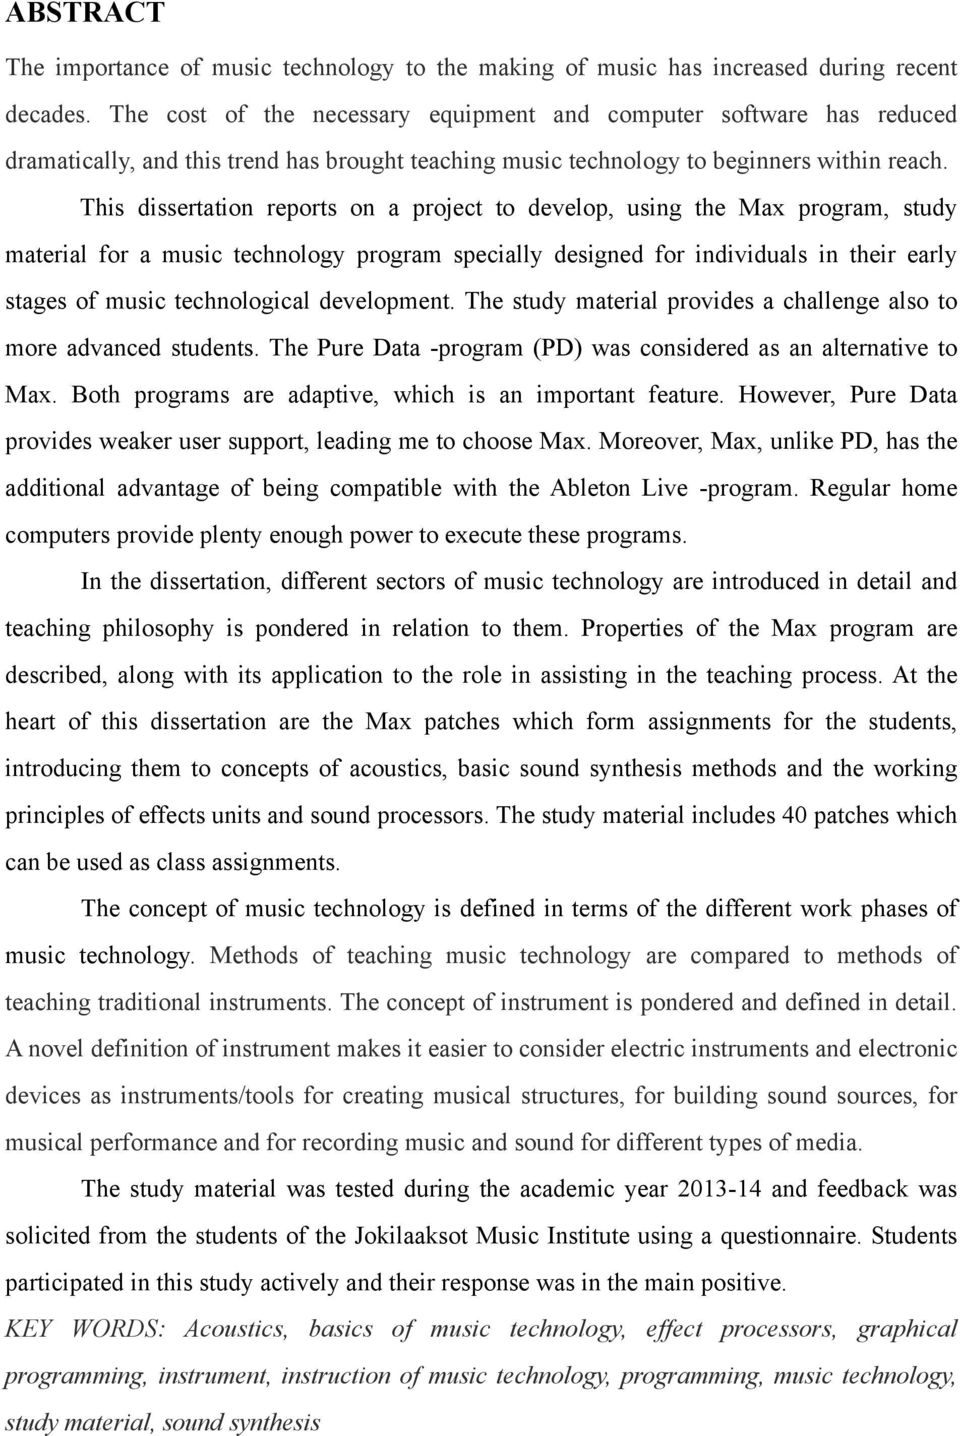 This dissertation reports on a project to develop, using the Max program, study material for a music technology program specially designed for individuals in their early stages of music technological